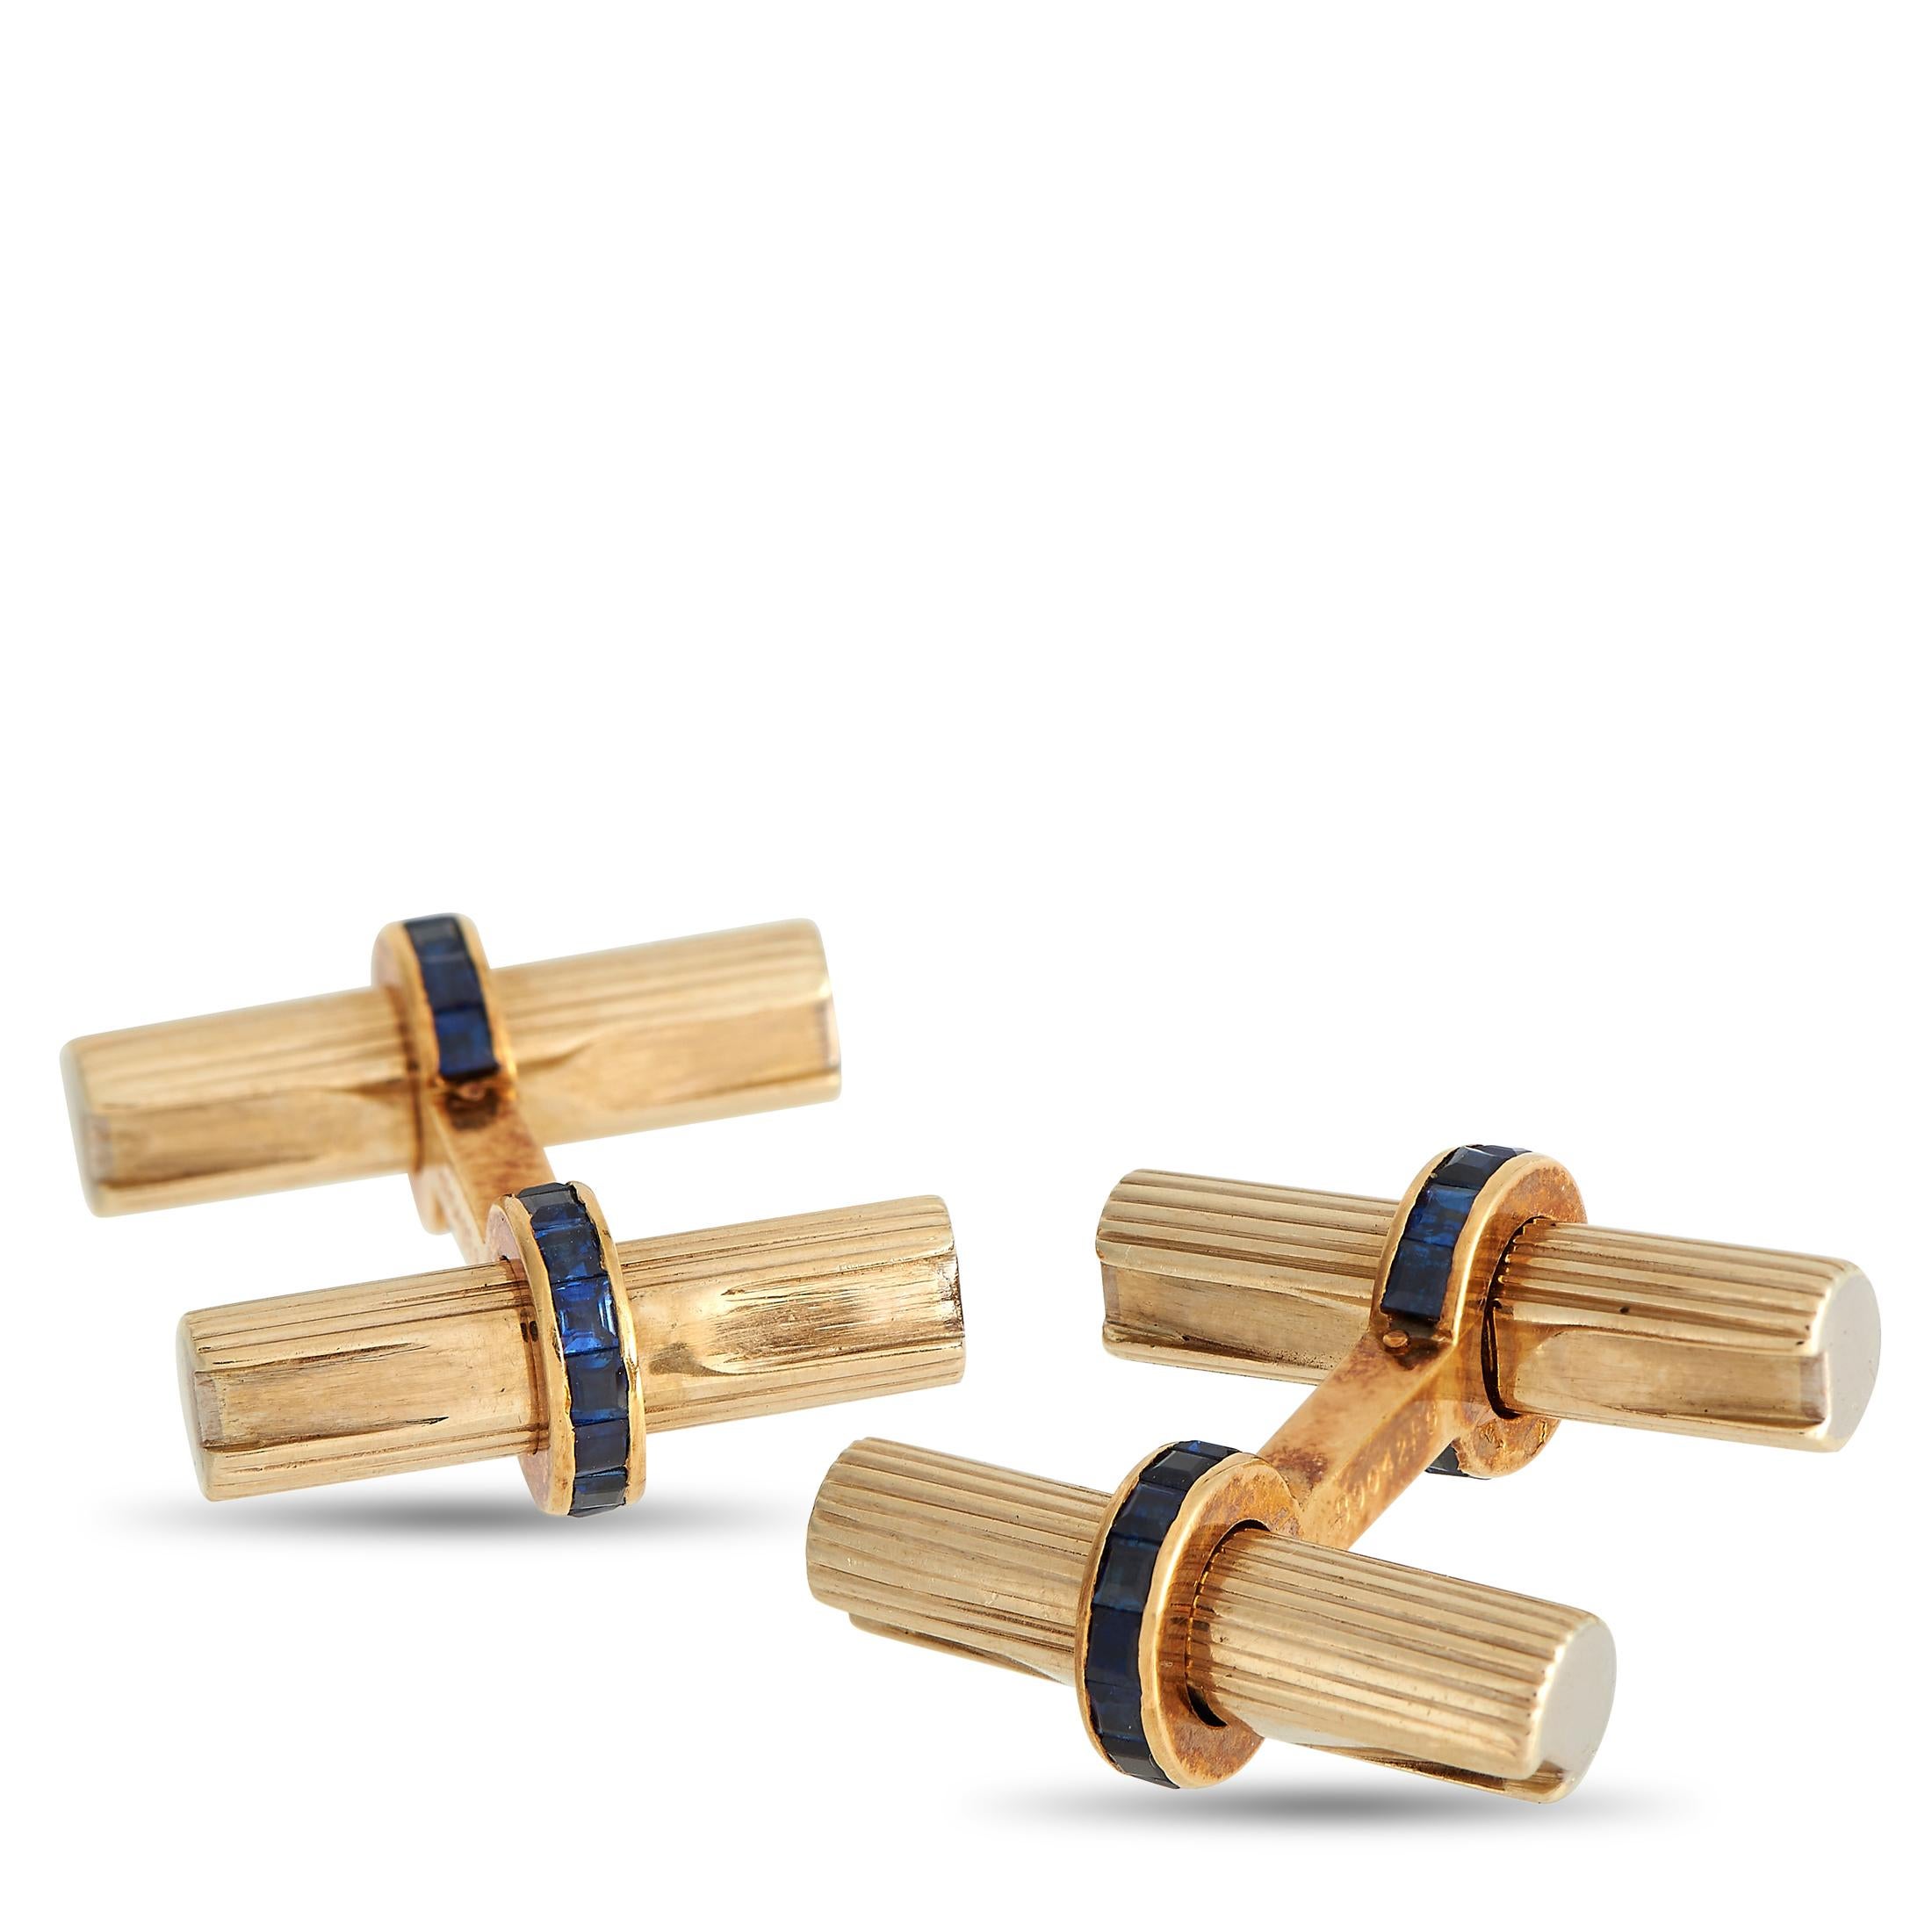 Here is a pair of 18K yellow gold VCA cufflinks to elevate your outfit and express your refined taste. The cufflinks come with a fluted baton design, complemented by hoop terminals with channel-set blue sapphires. Each cufflink measures 0.75 by